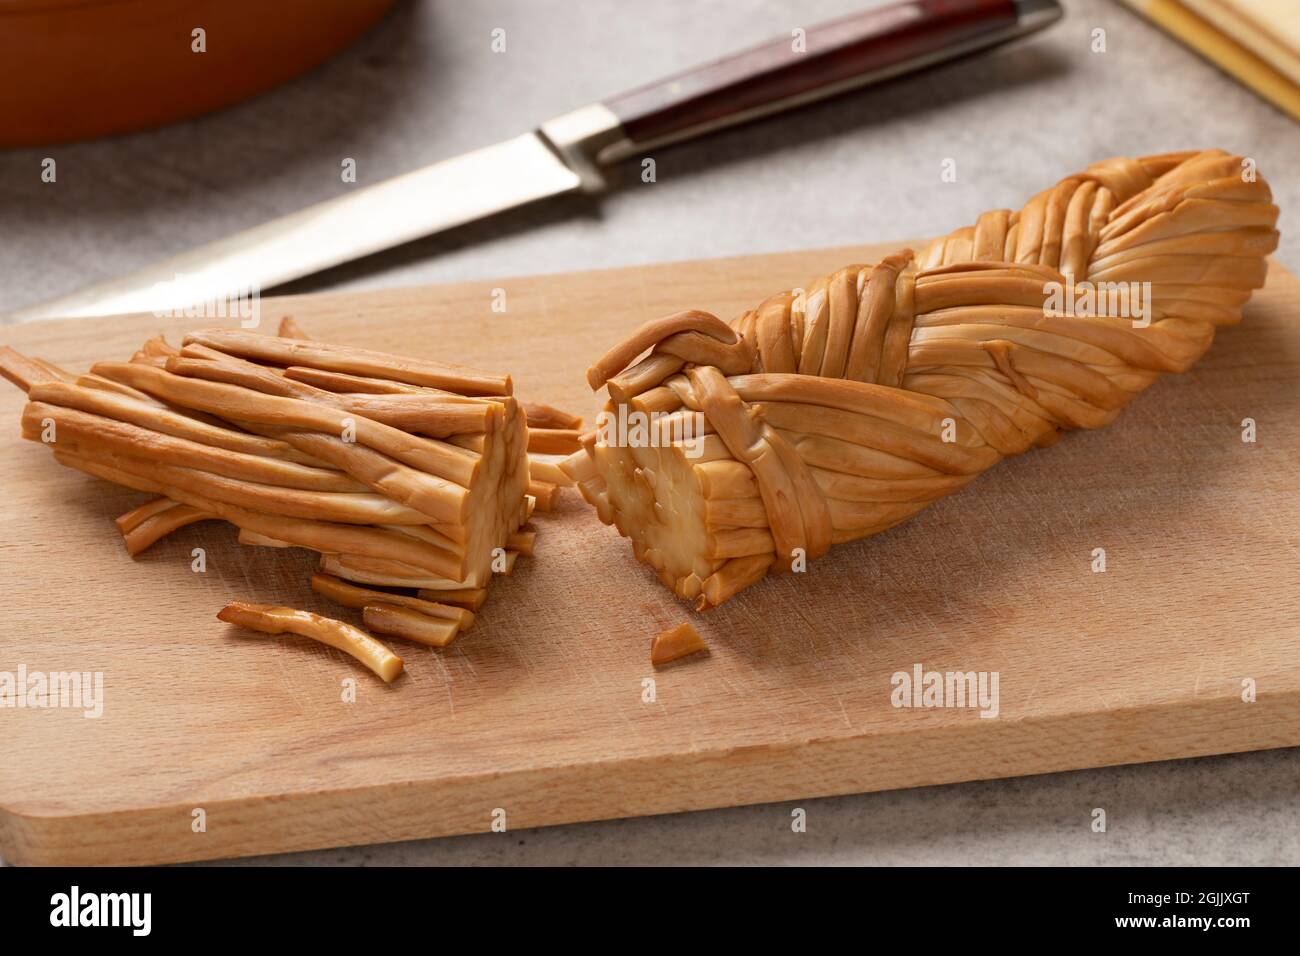 Smoked braided cheese cuttings, called Chechil, from the Adyghe Republic on a cutting board close up Stock Photo